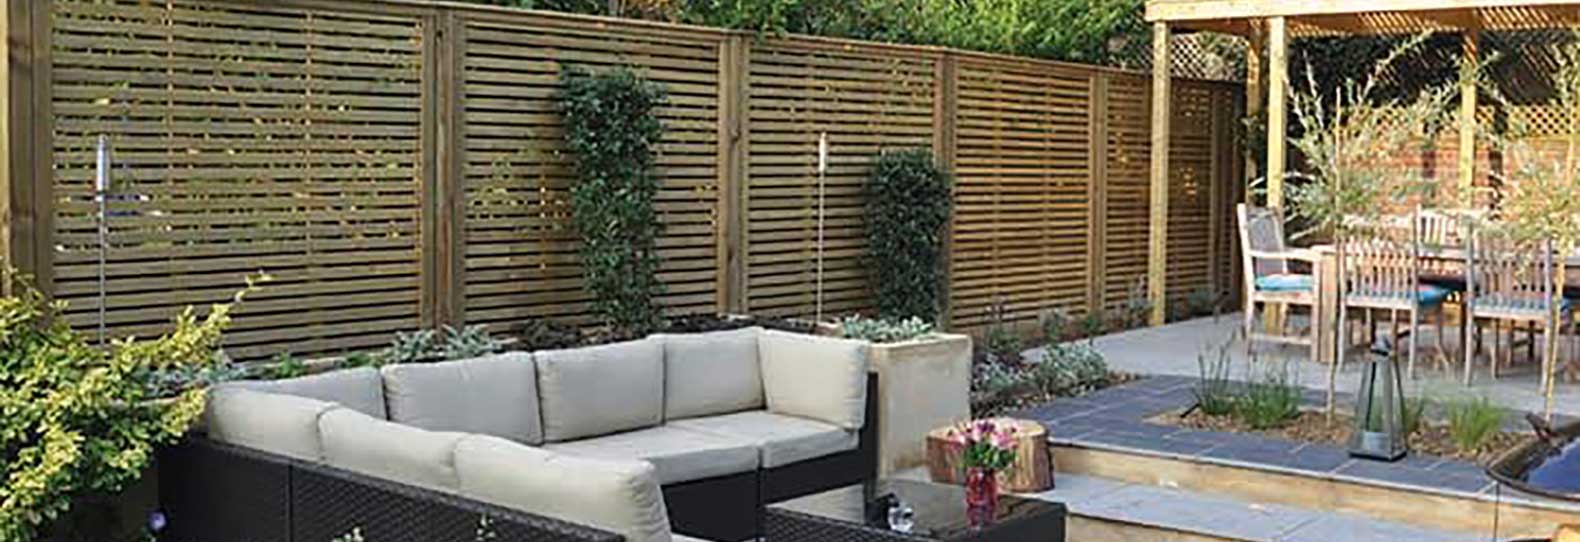 How to use Decorative Fence Panels in the Garden - AVS Fencing ...